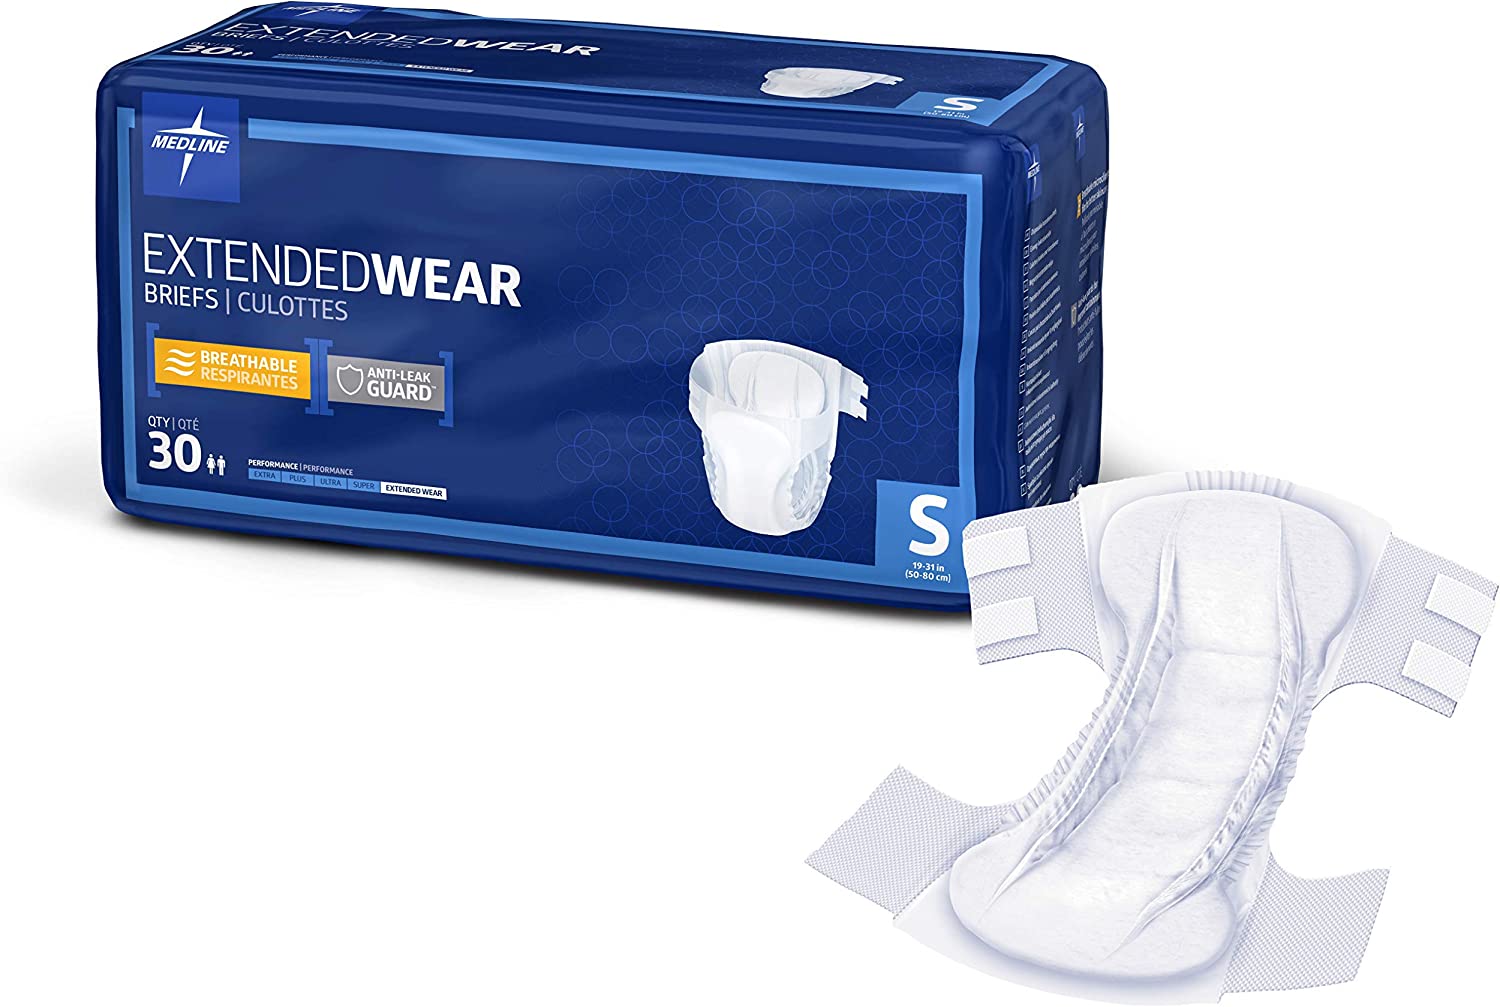 Medline Extended Wear Overnight Adult Briefs with Tabs, Maximum Absorbency Adult Diapers, Small (30 Count)